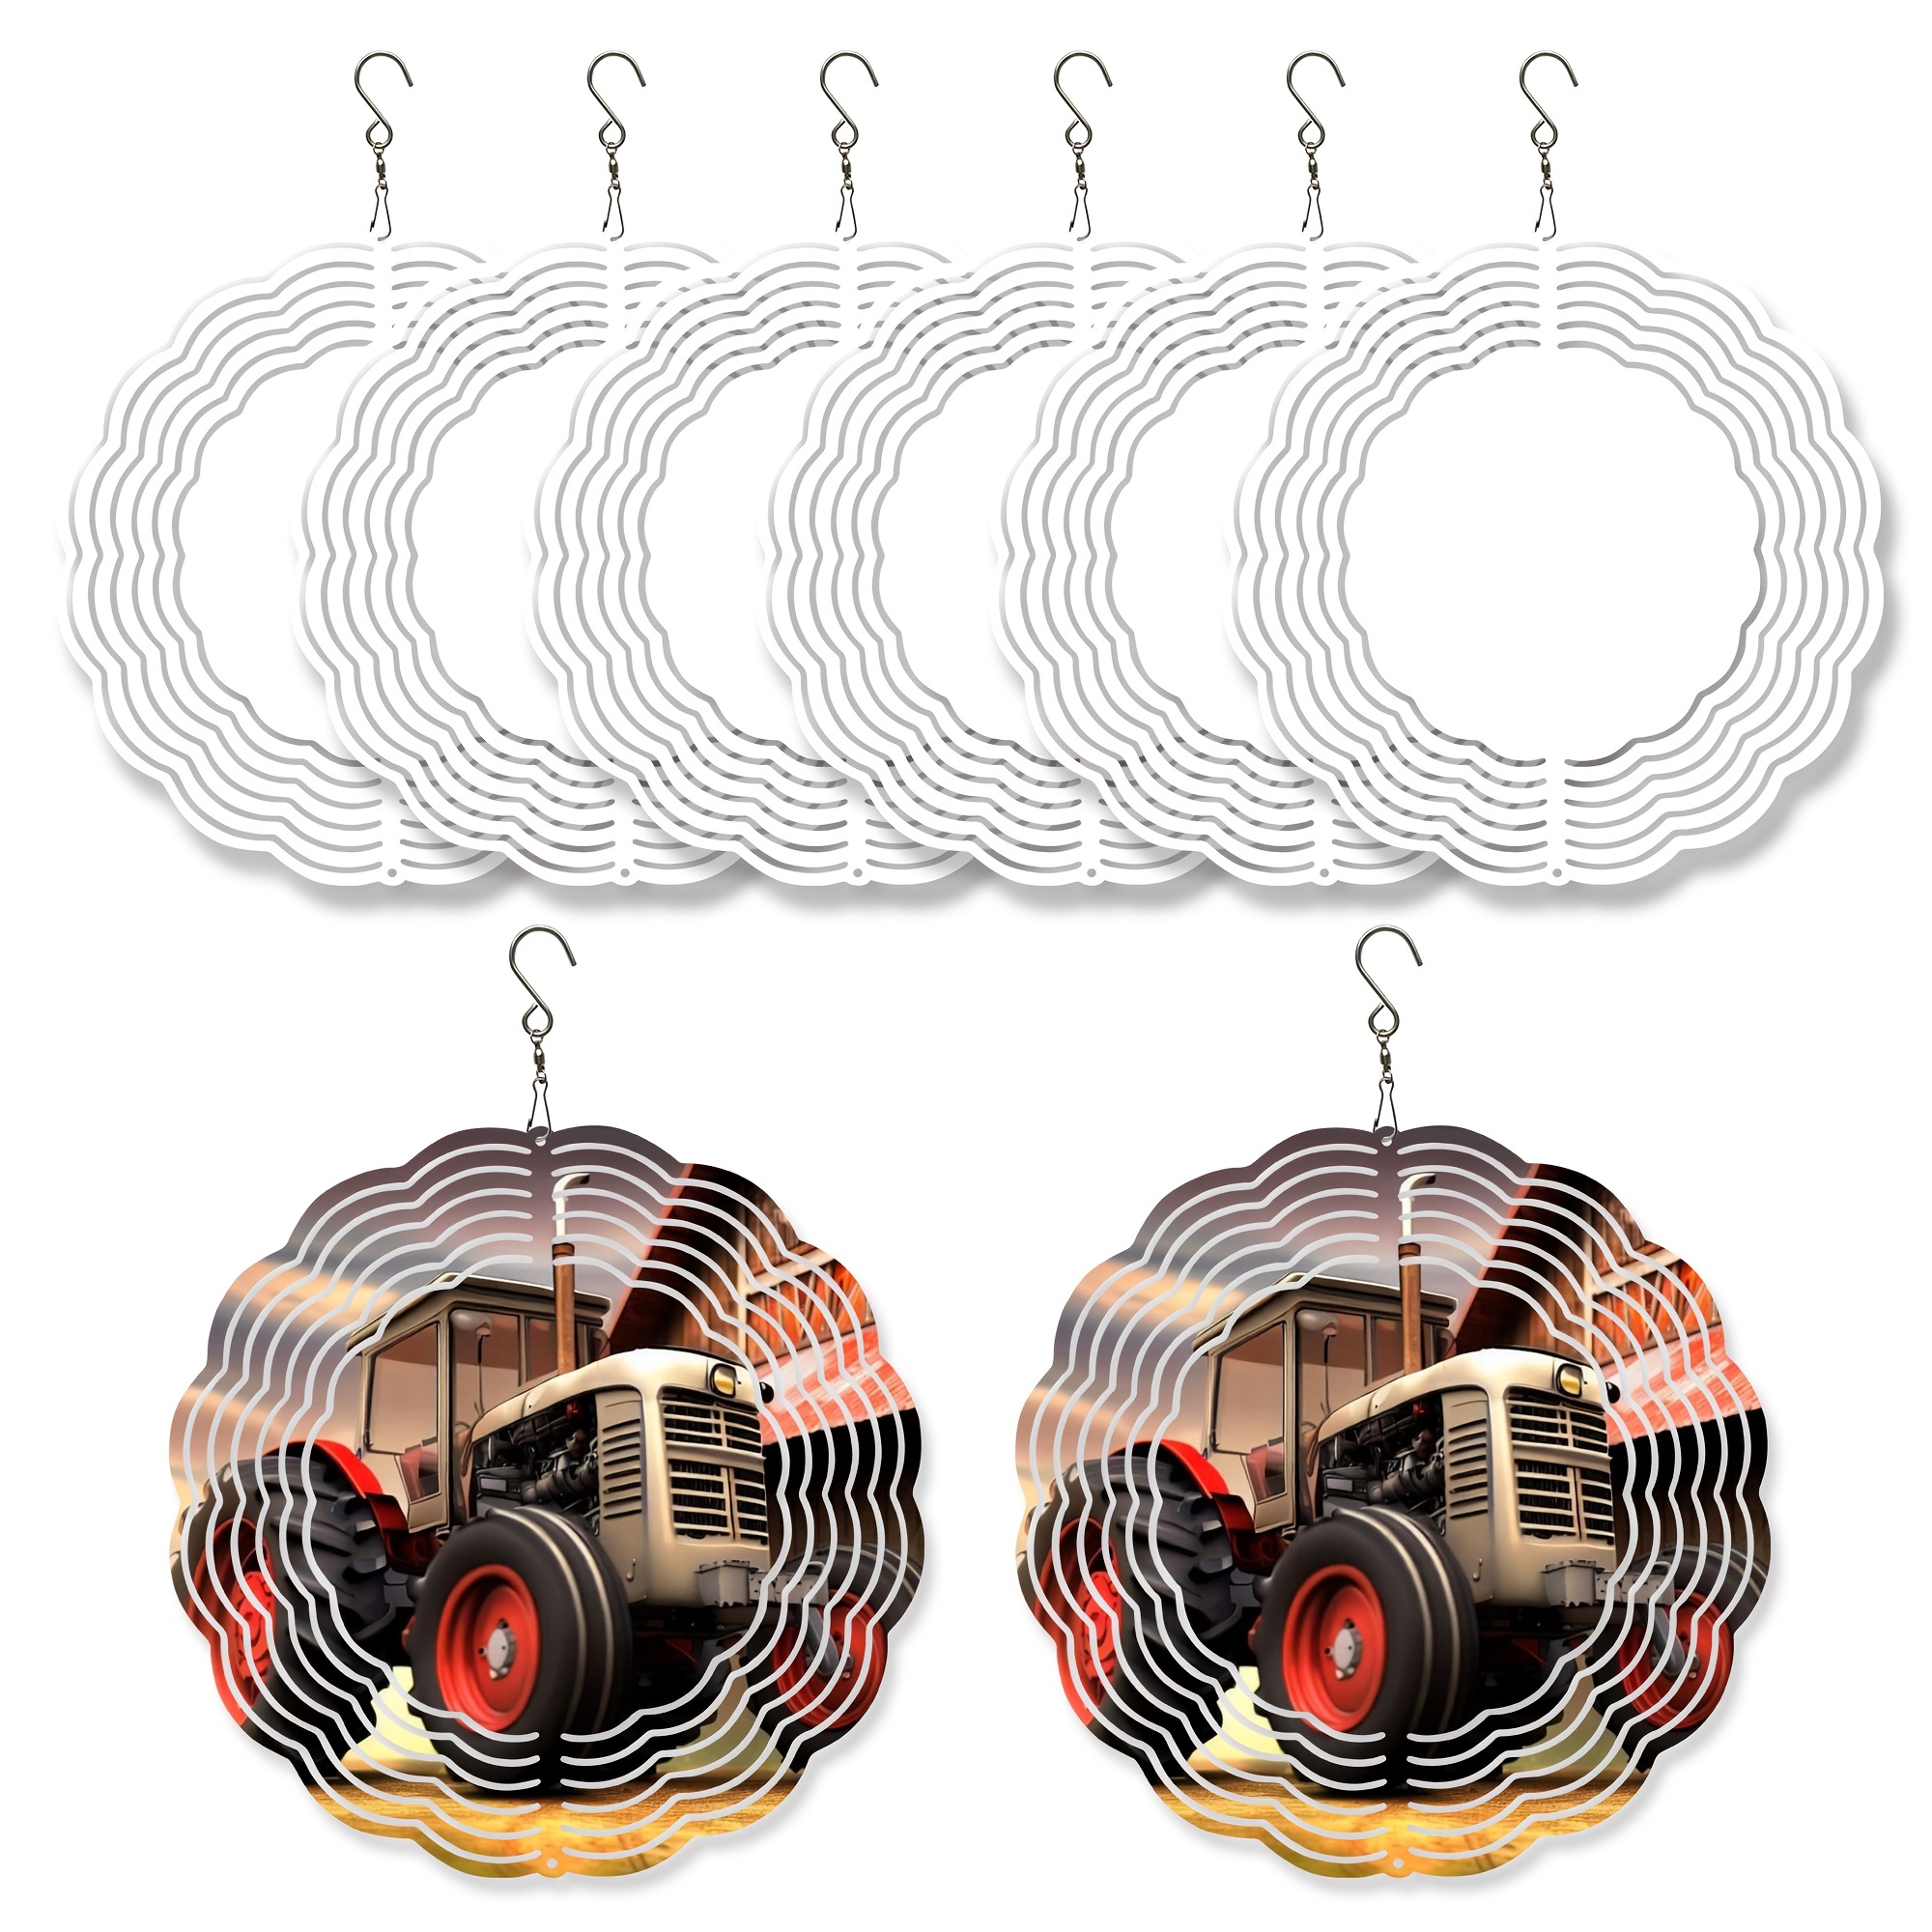 10 Inches 3D Spirlal Metal Aluminum Wind Spinners Sublimation